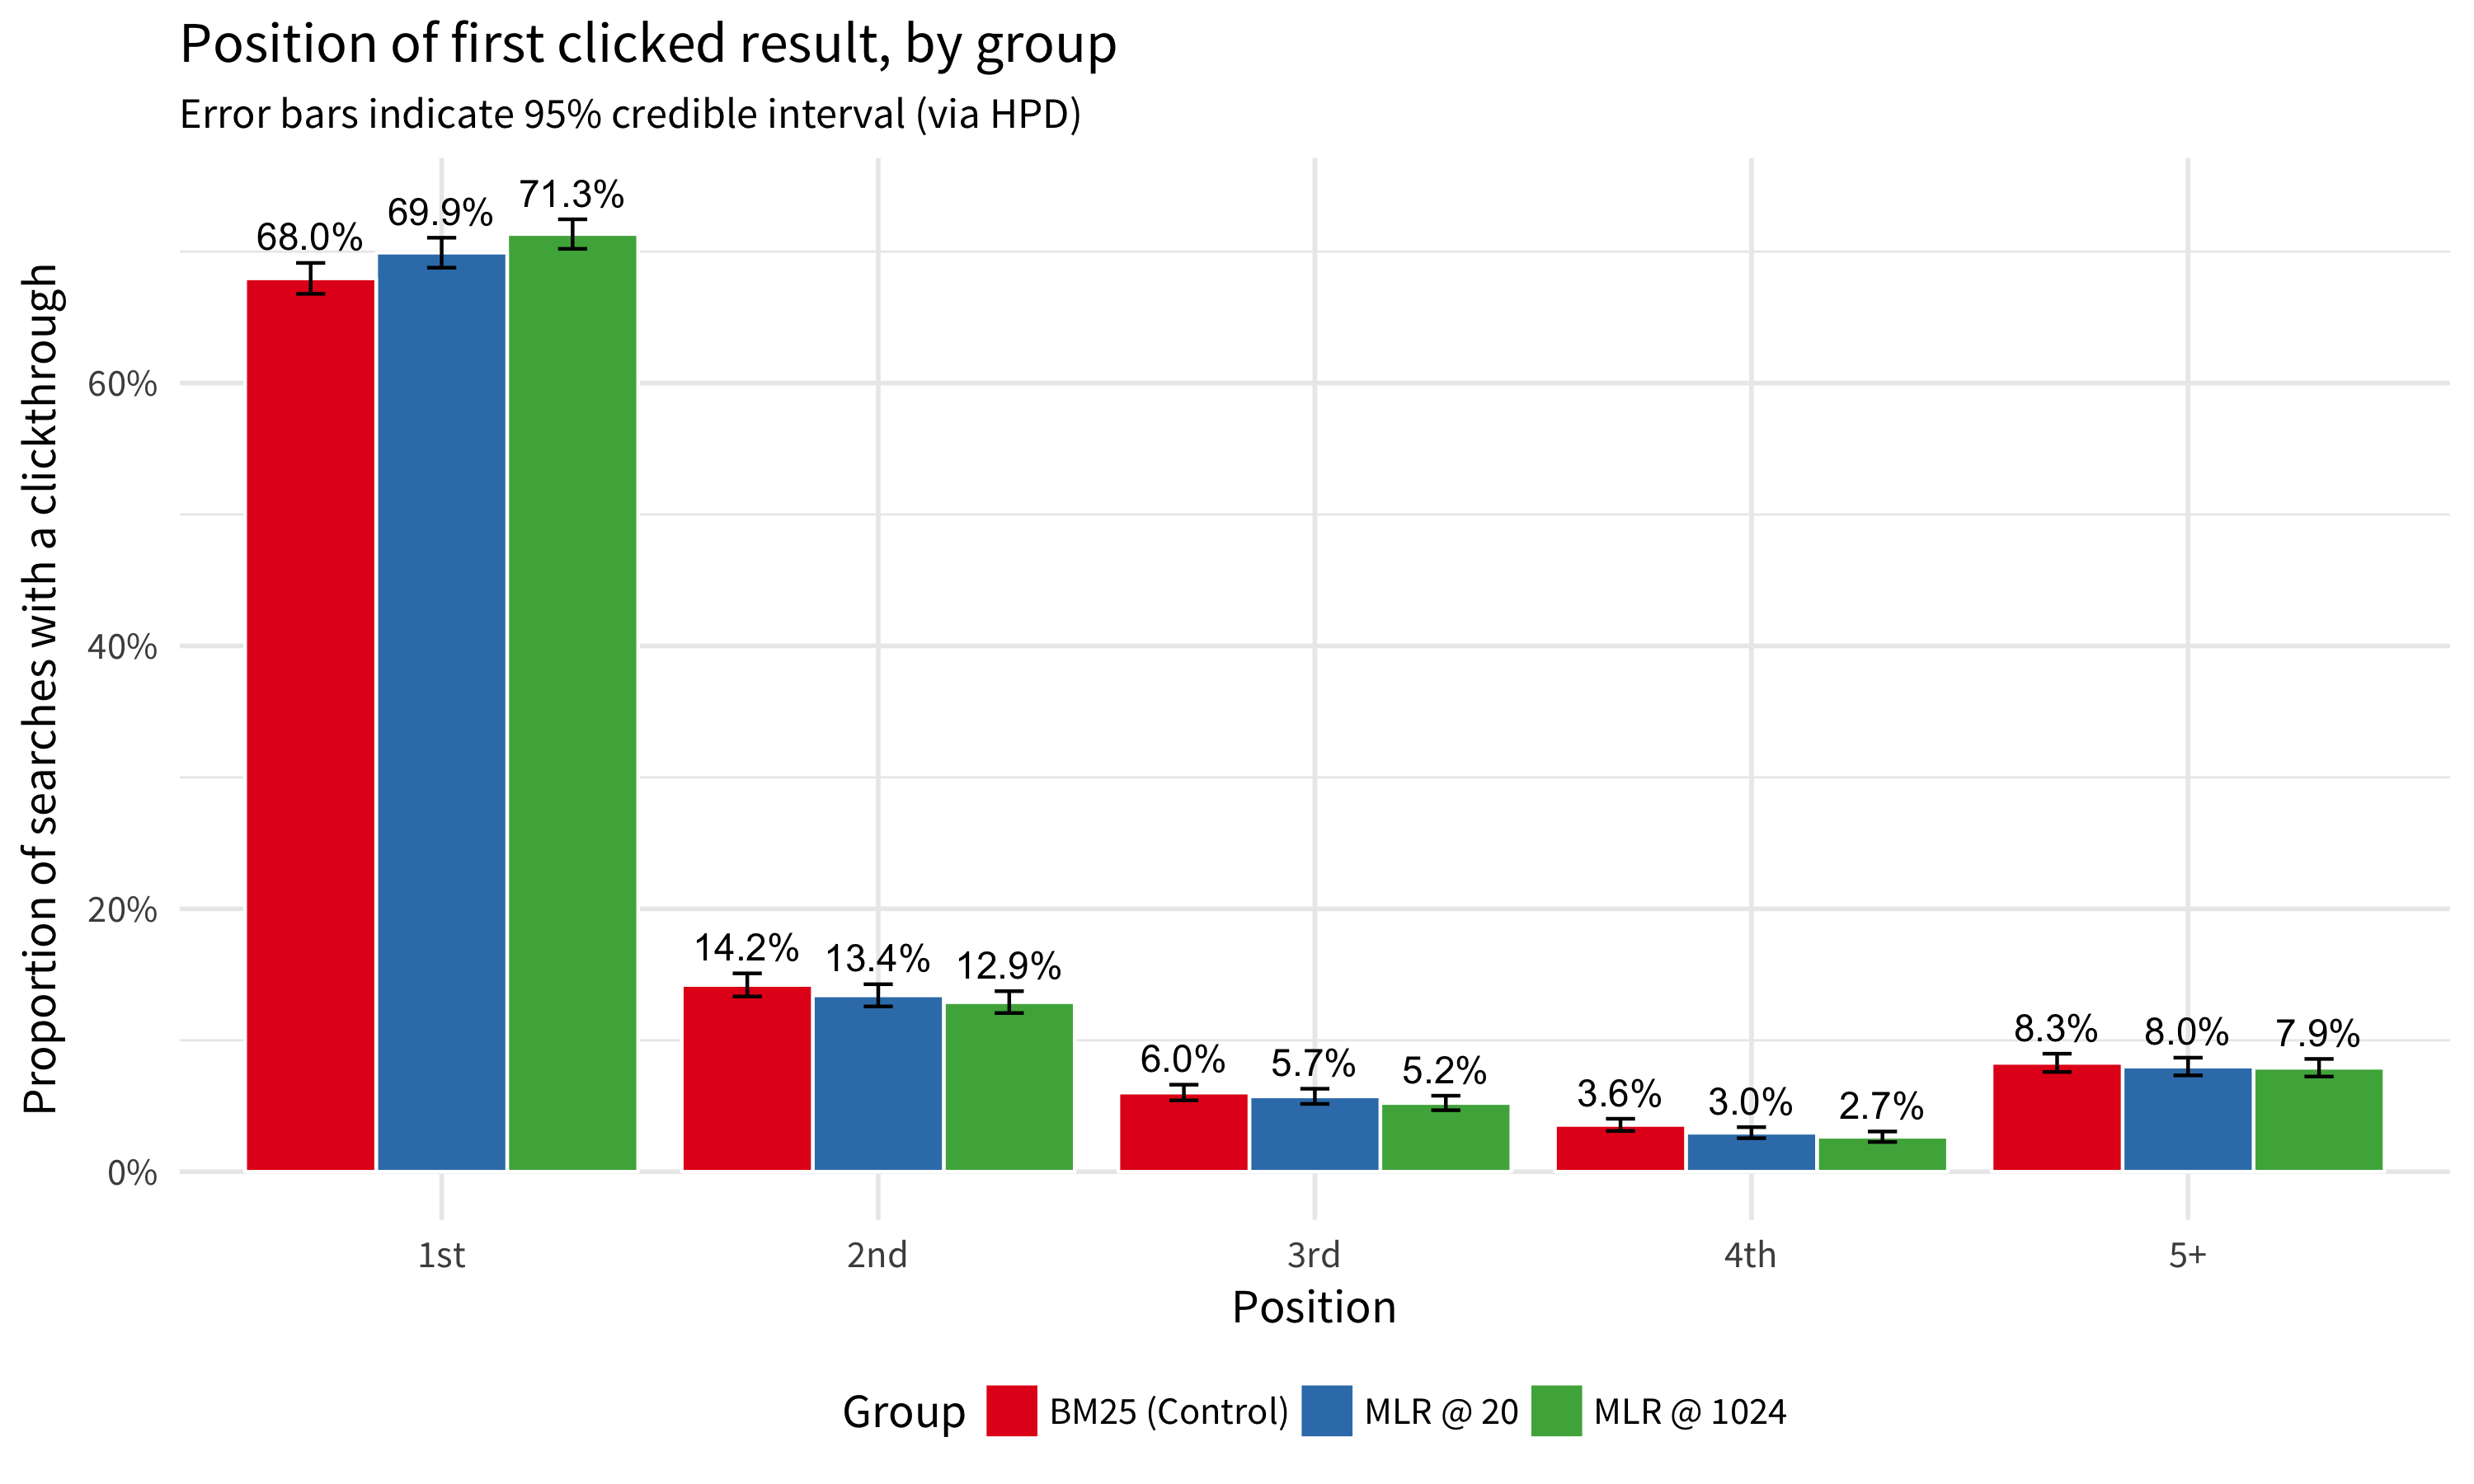 **Figure 3**: While users in general tend to click on the first search result first, users in the groups with MLR-provided results were slightly more likely than users in the control group with BM25-provided results.